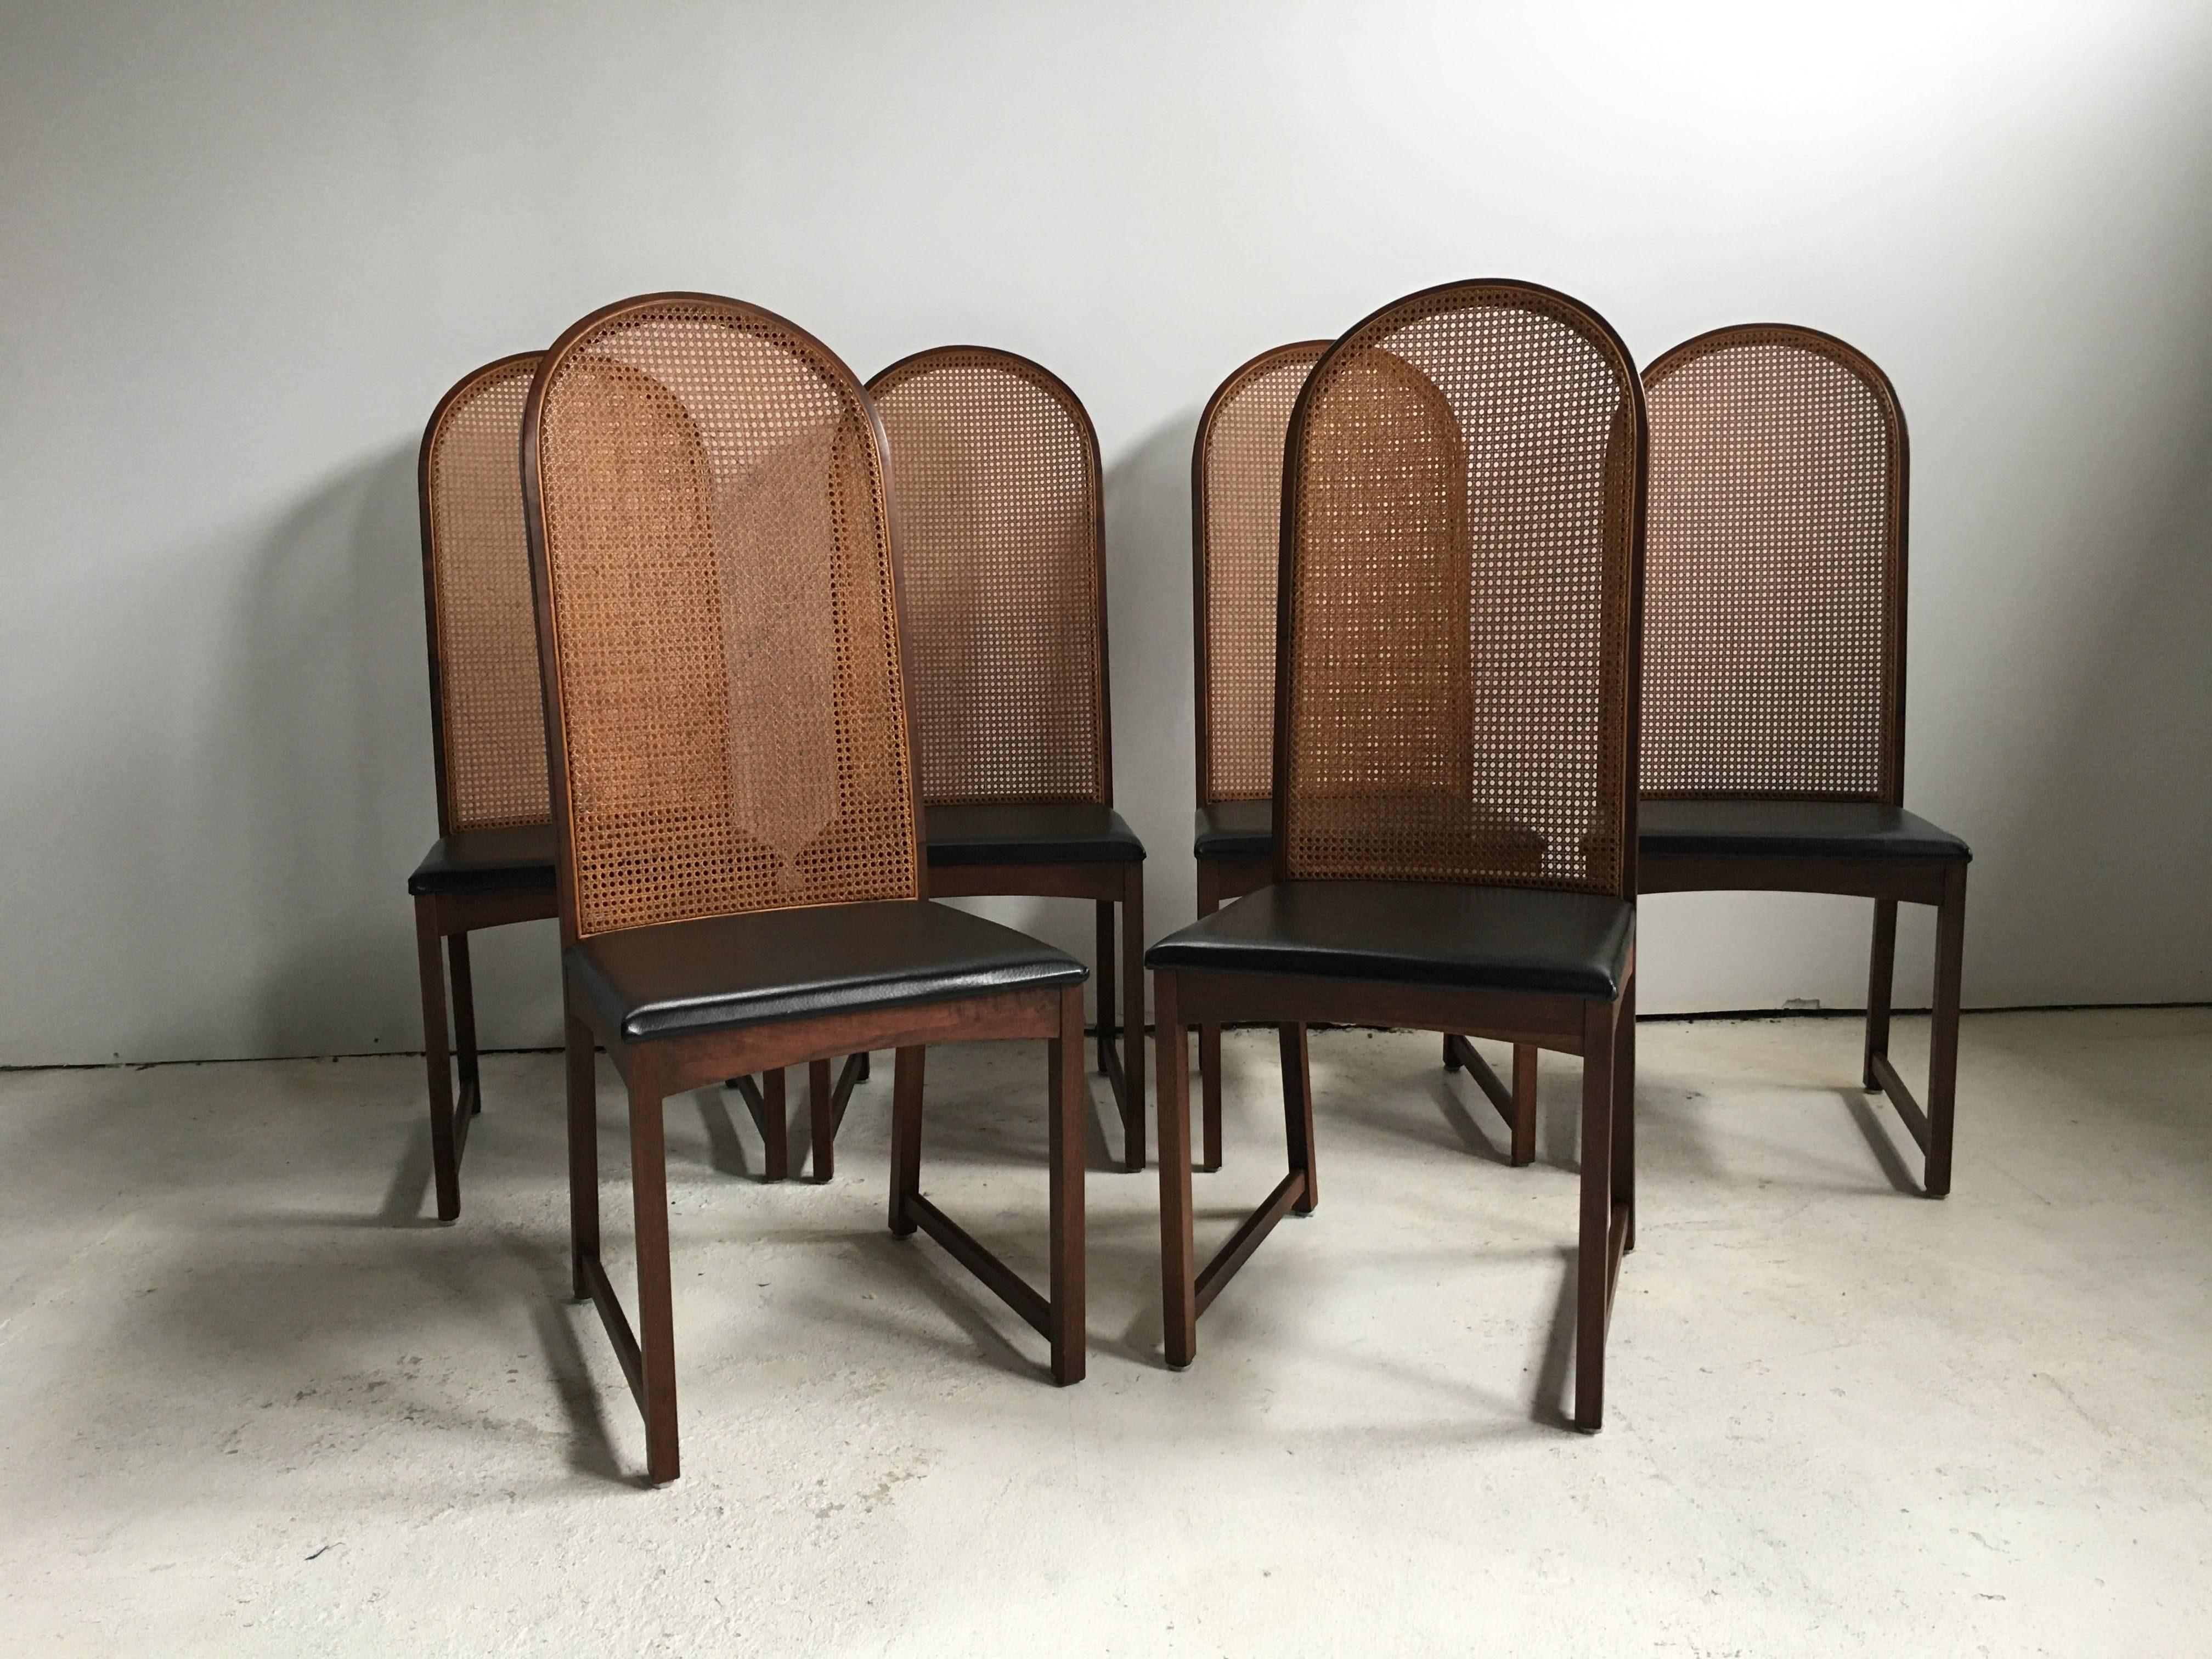 Dining chairs by Milo Baughman.